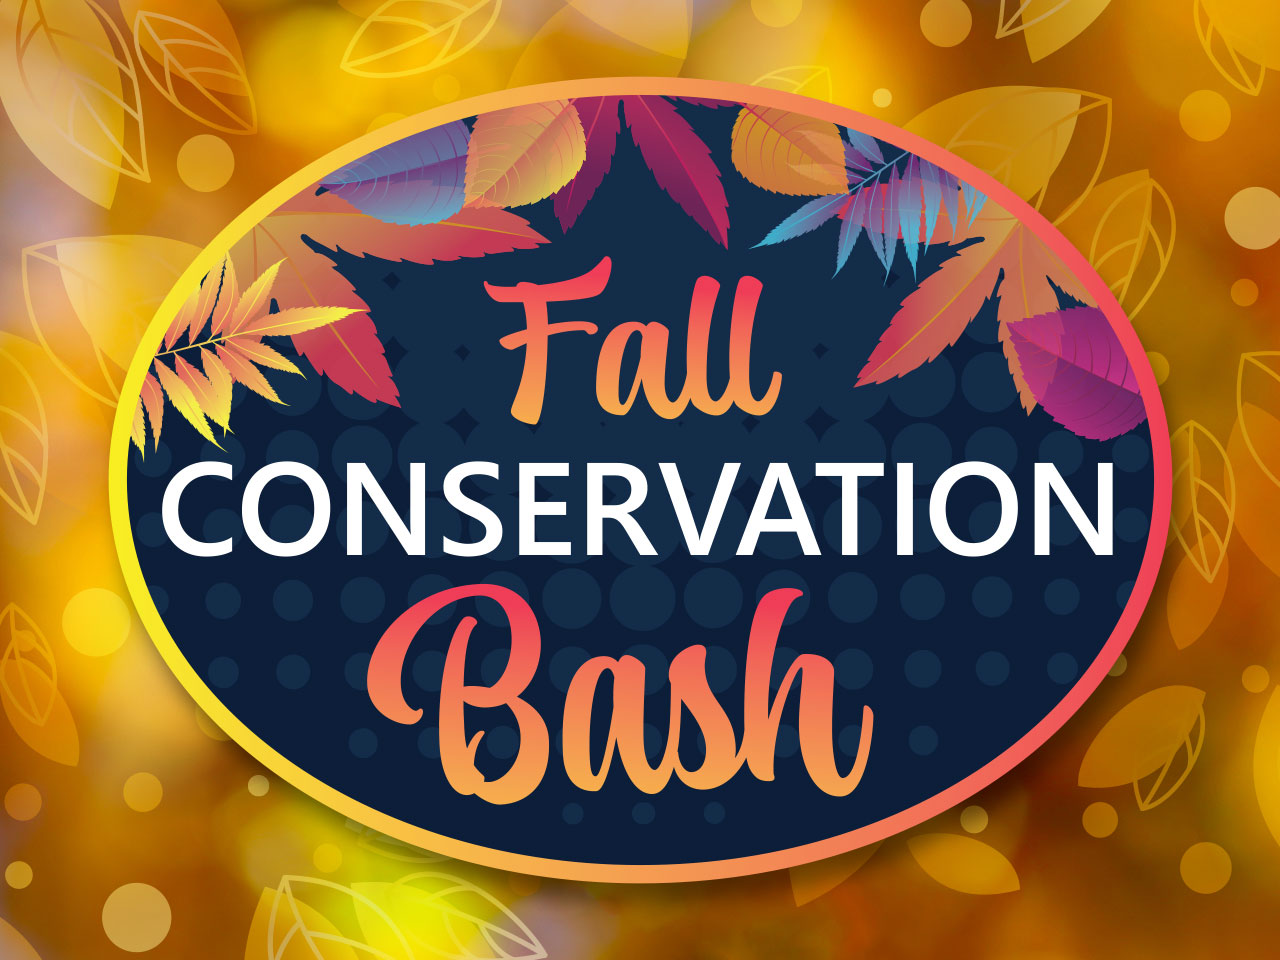 Fall Conservation Bash